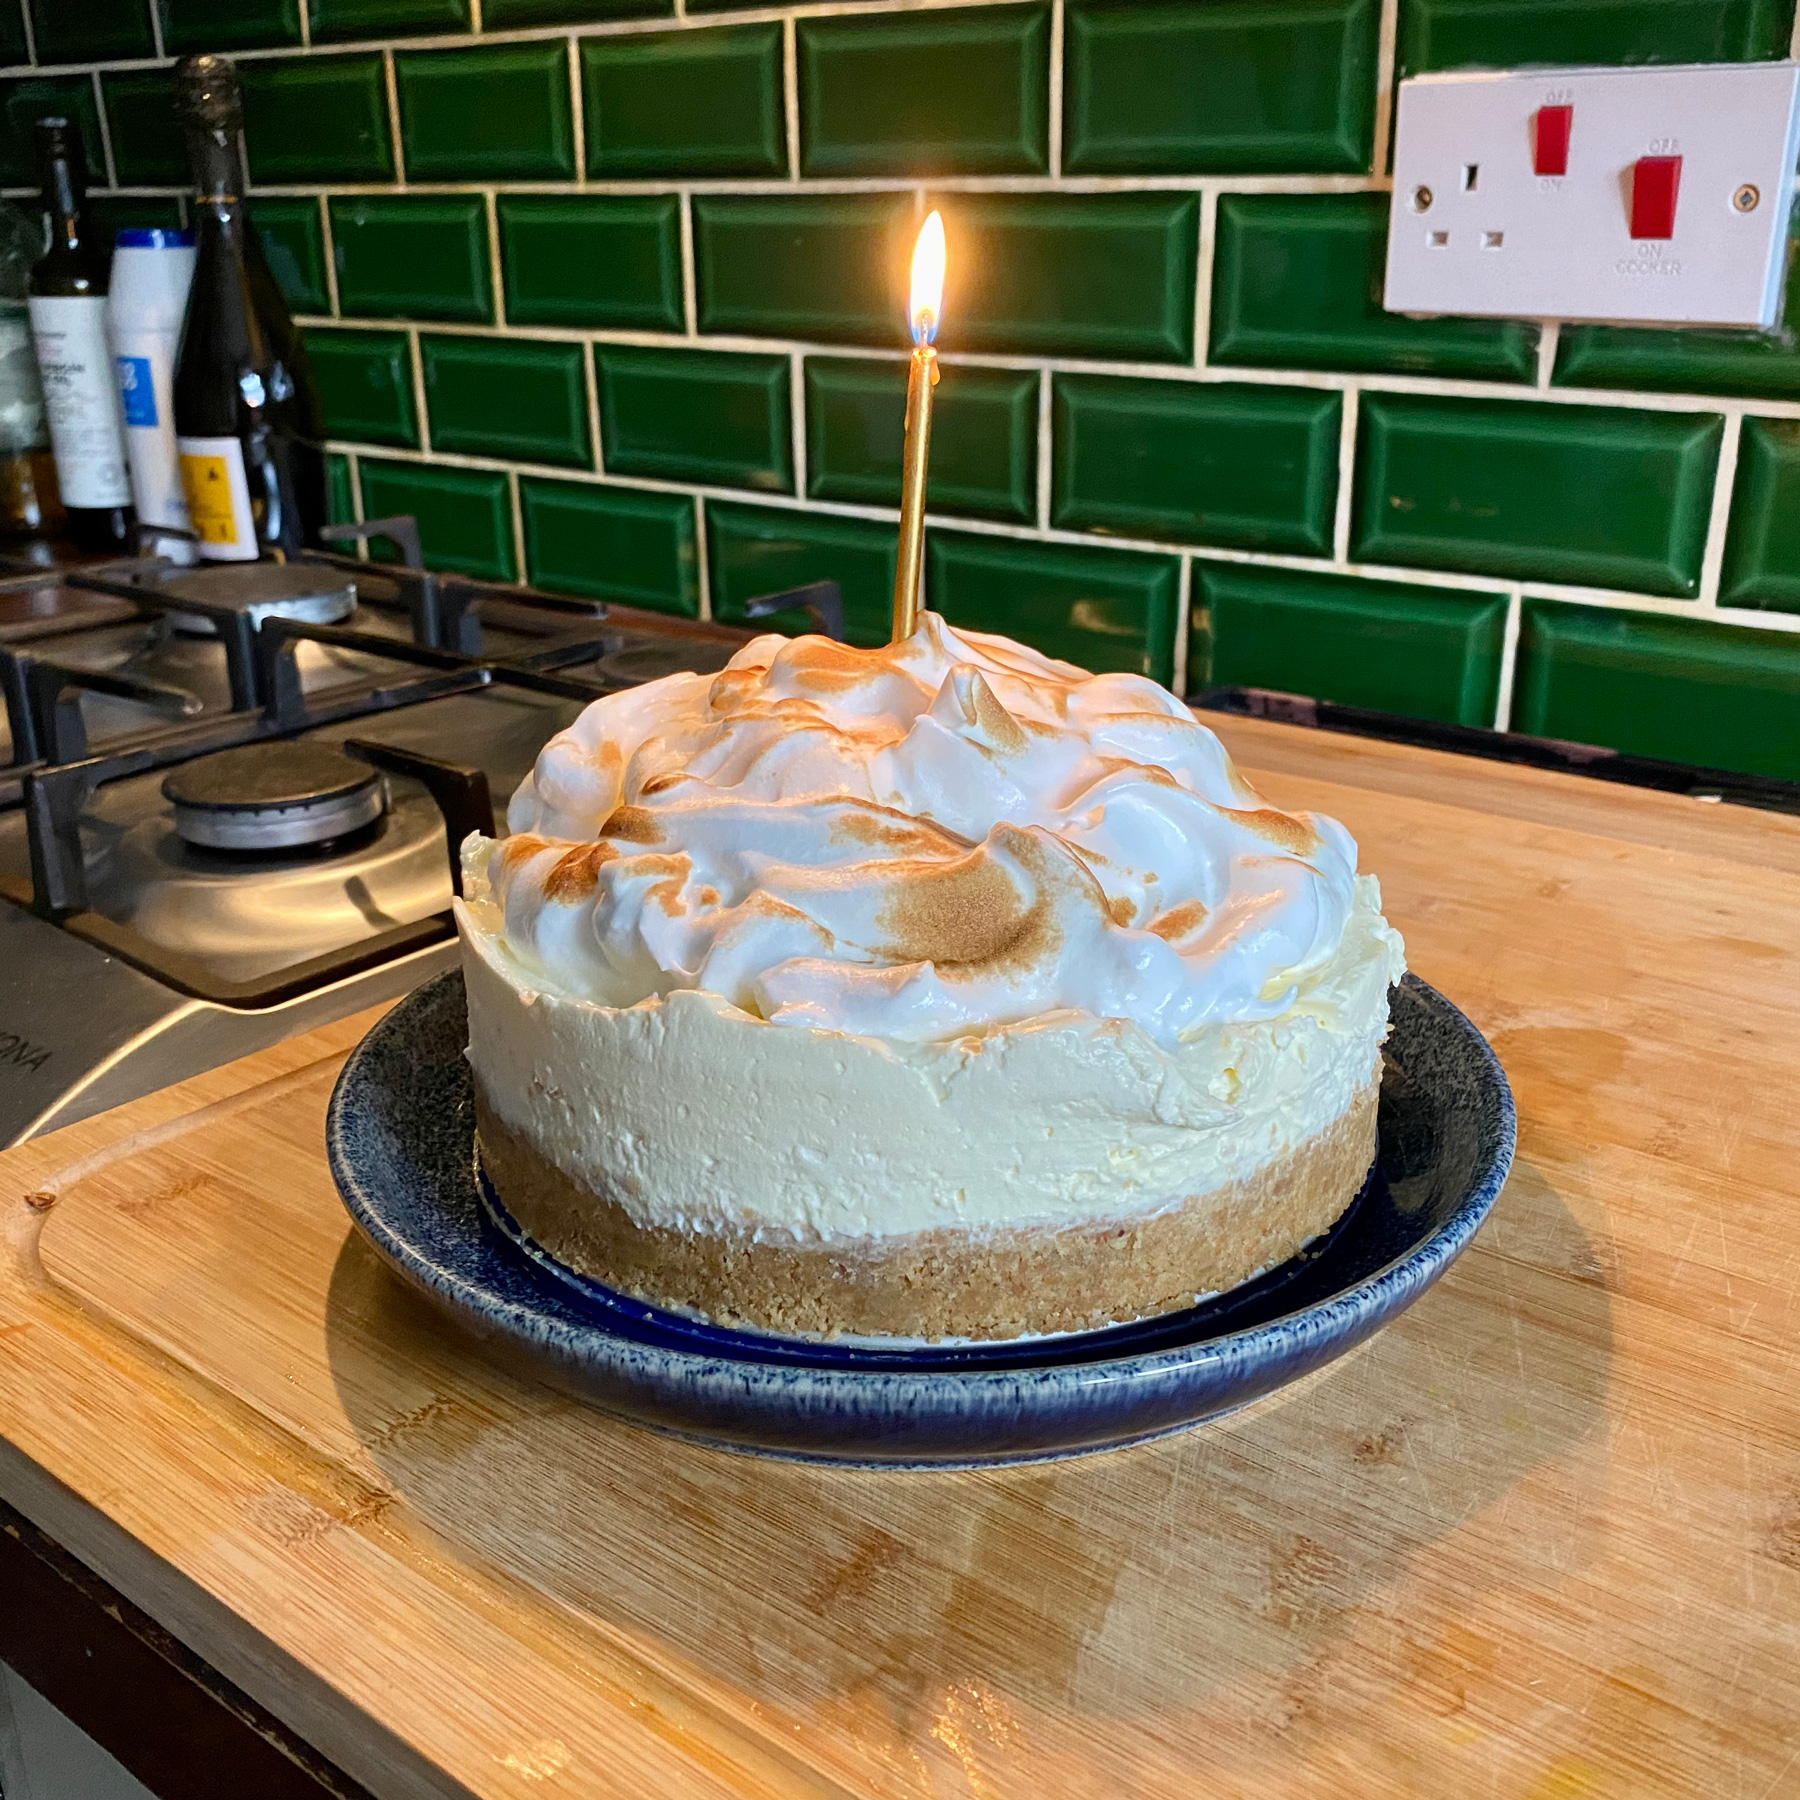 A beautiful-looking cheesecake topped with Italian Meringue and a single candle